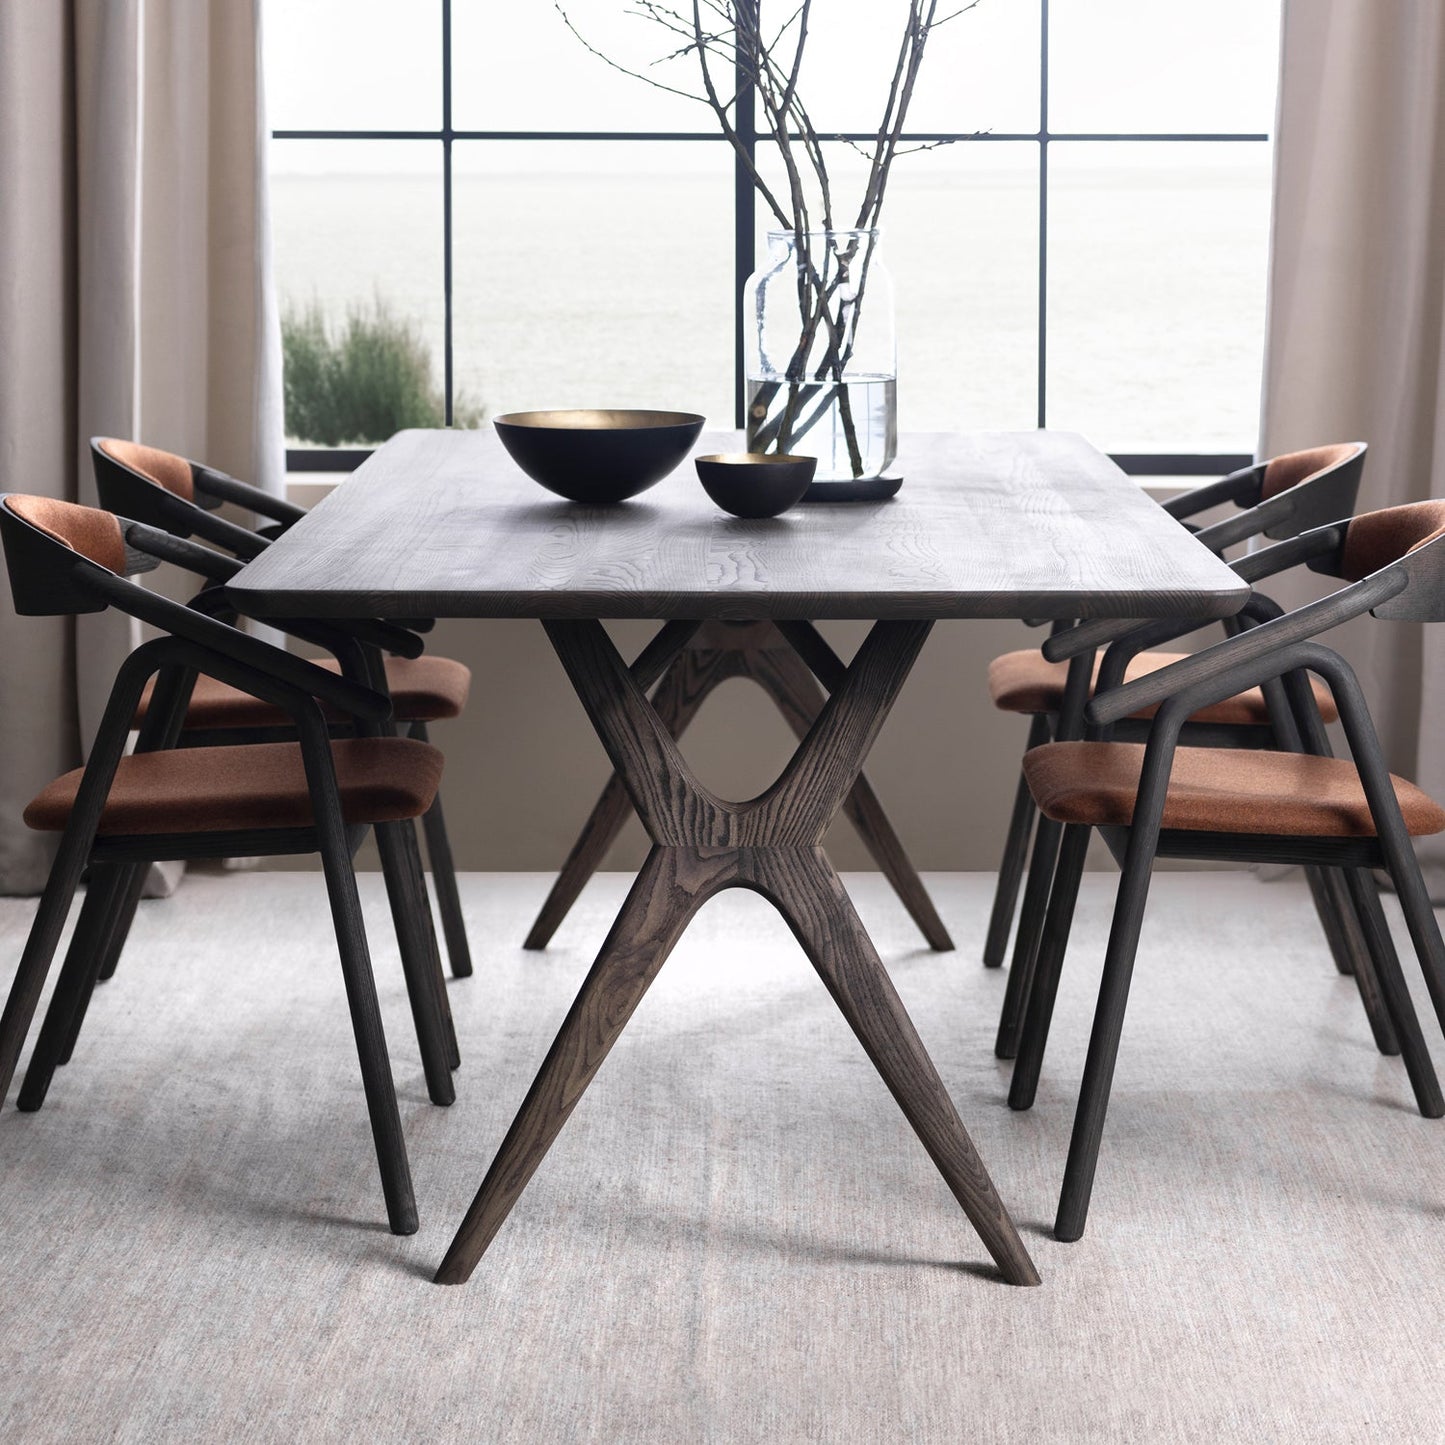 Rose Hill Ash Dining Table Leaf for Extension